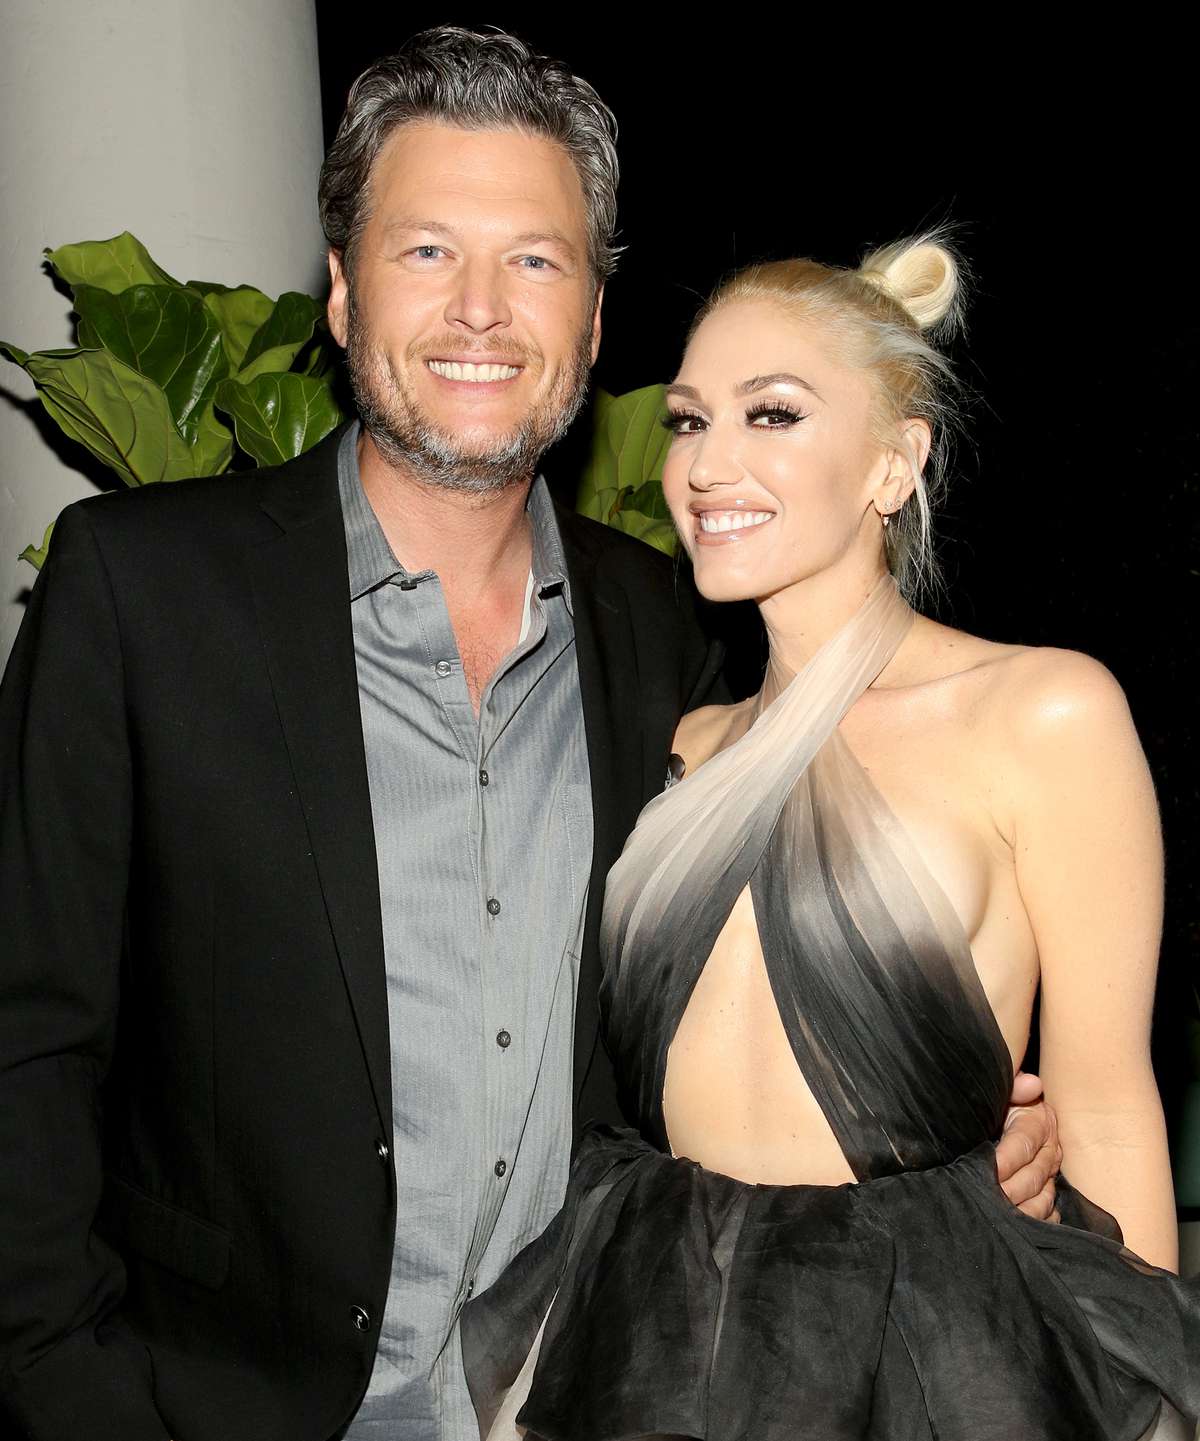 Recording artists Blake Shelton (L) and Gwen Stefani attend Glamour Women of the Year 2016 Dinner at Paley on November 14, 2016 in Hollywood, California.